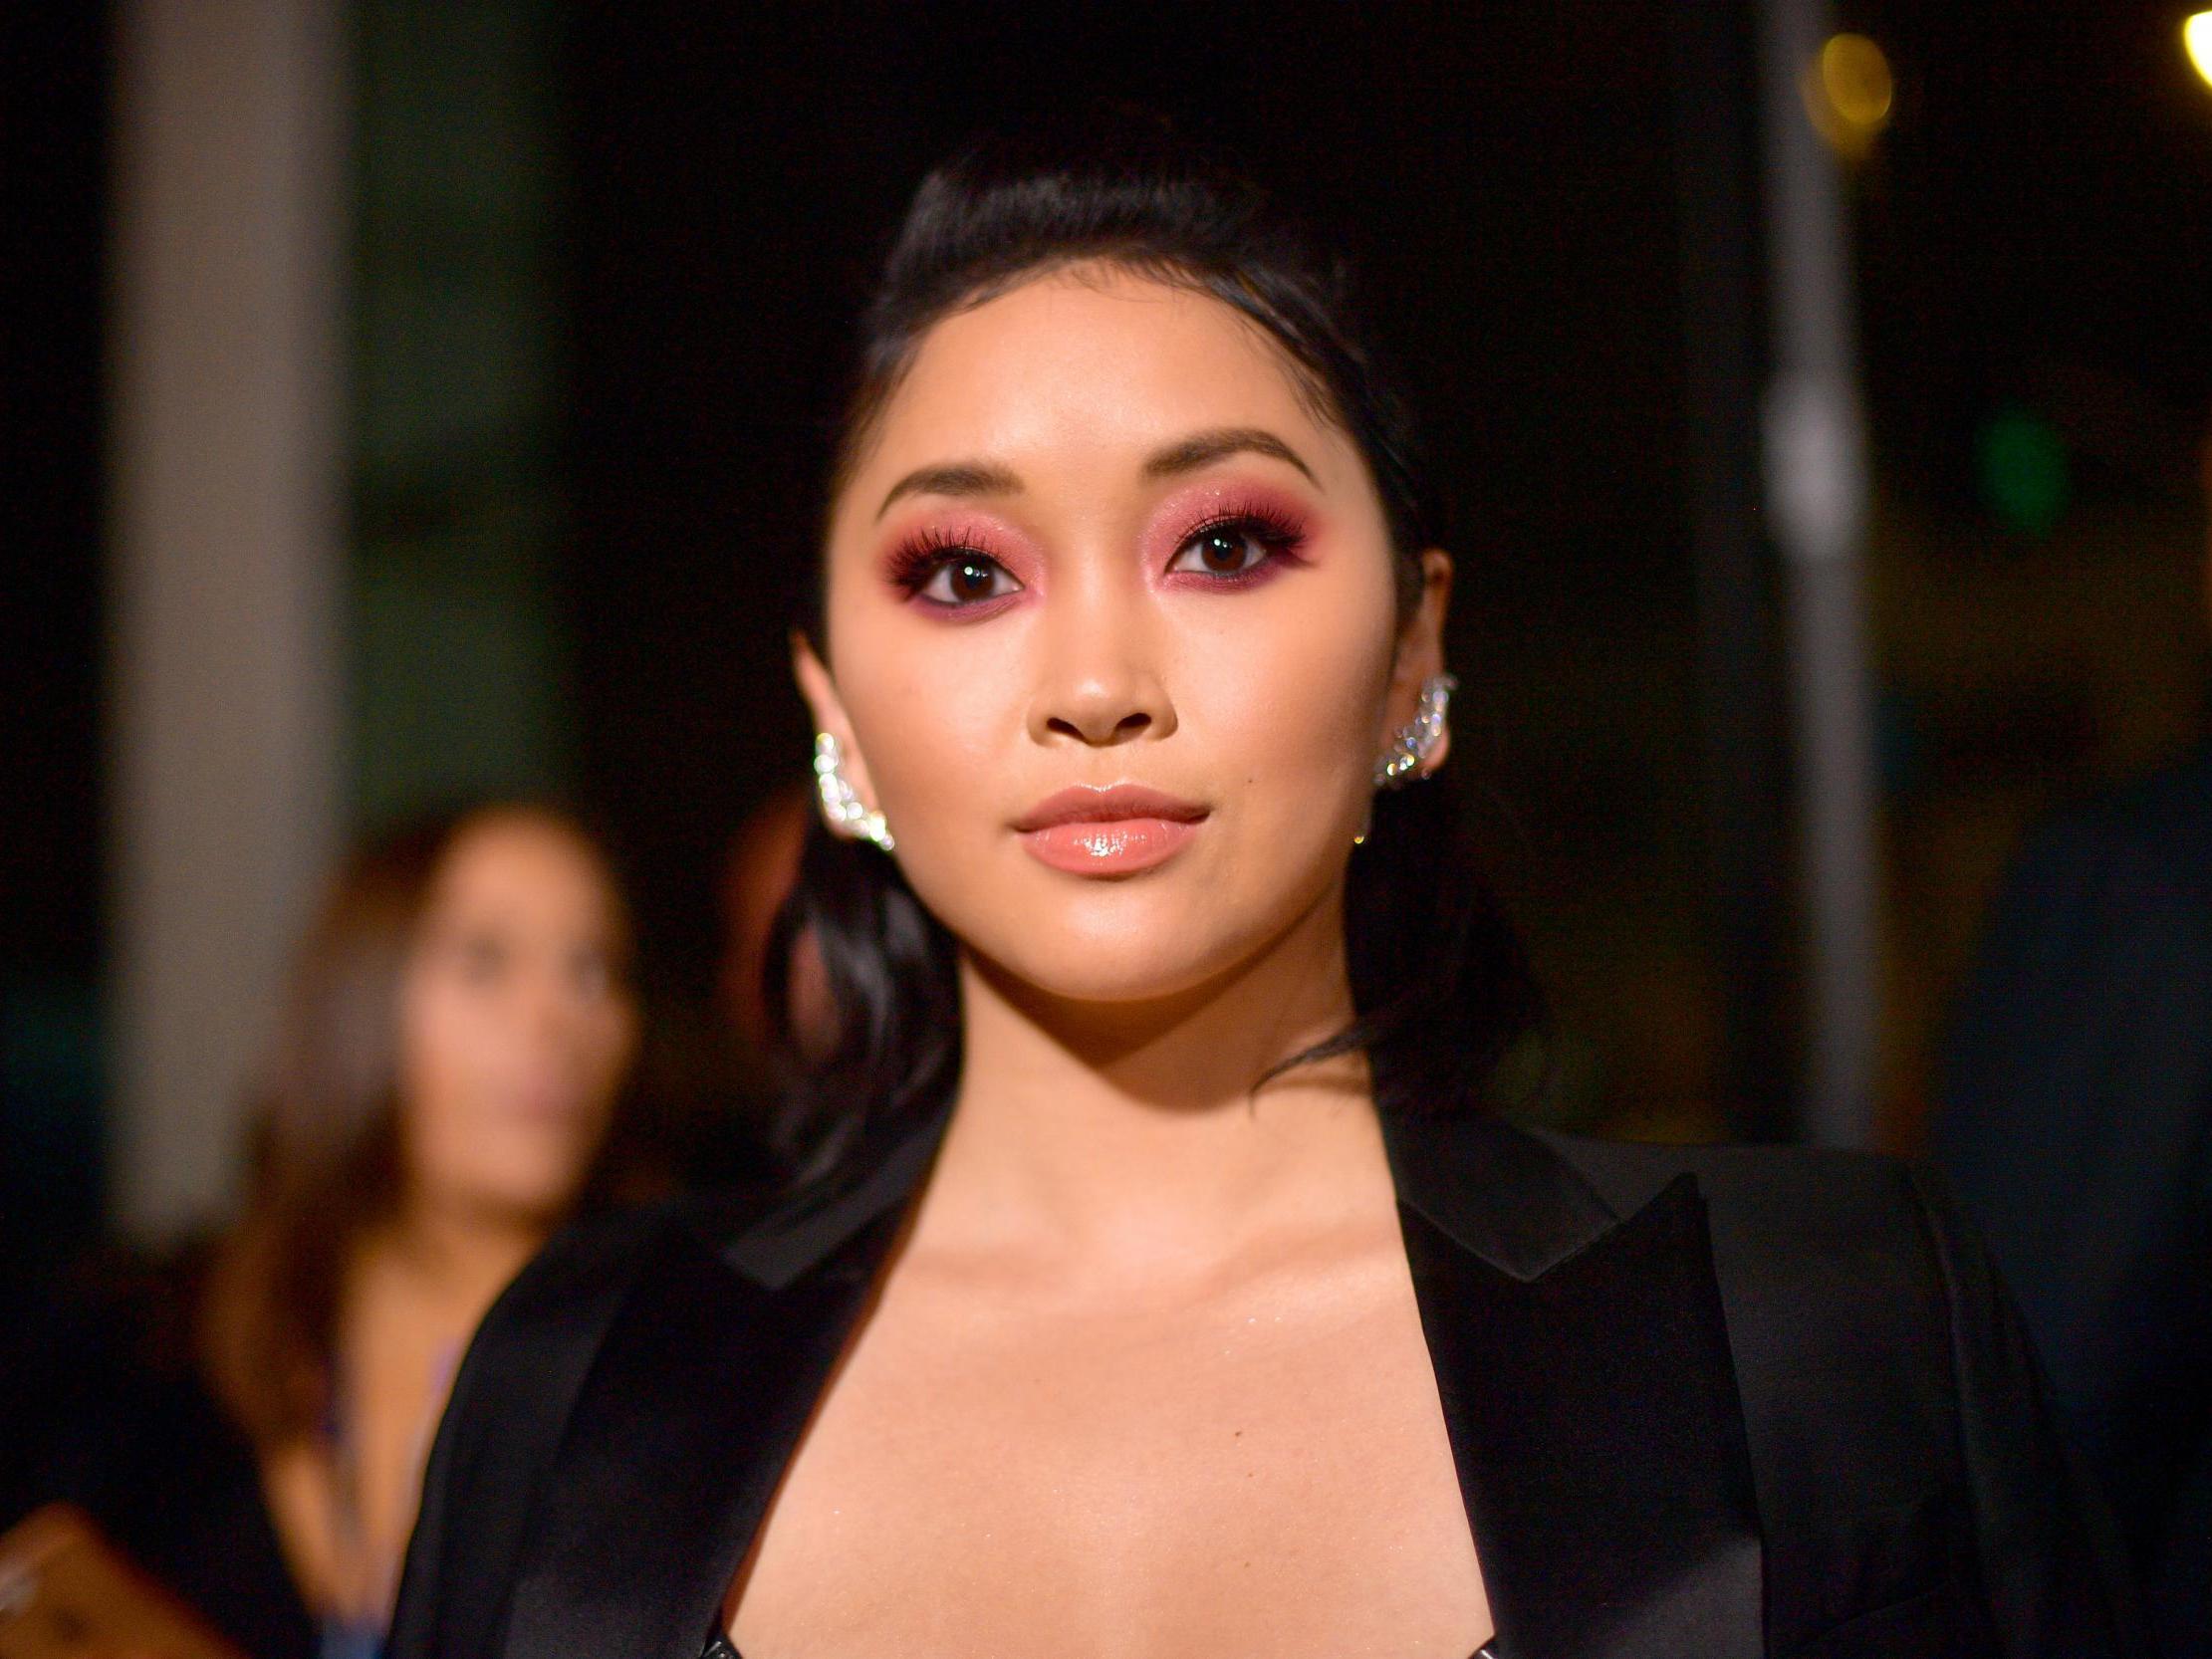 Lana Condor on past eating disorder and body dysmorphia: 'You have